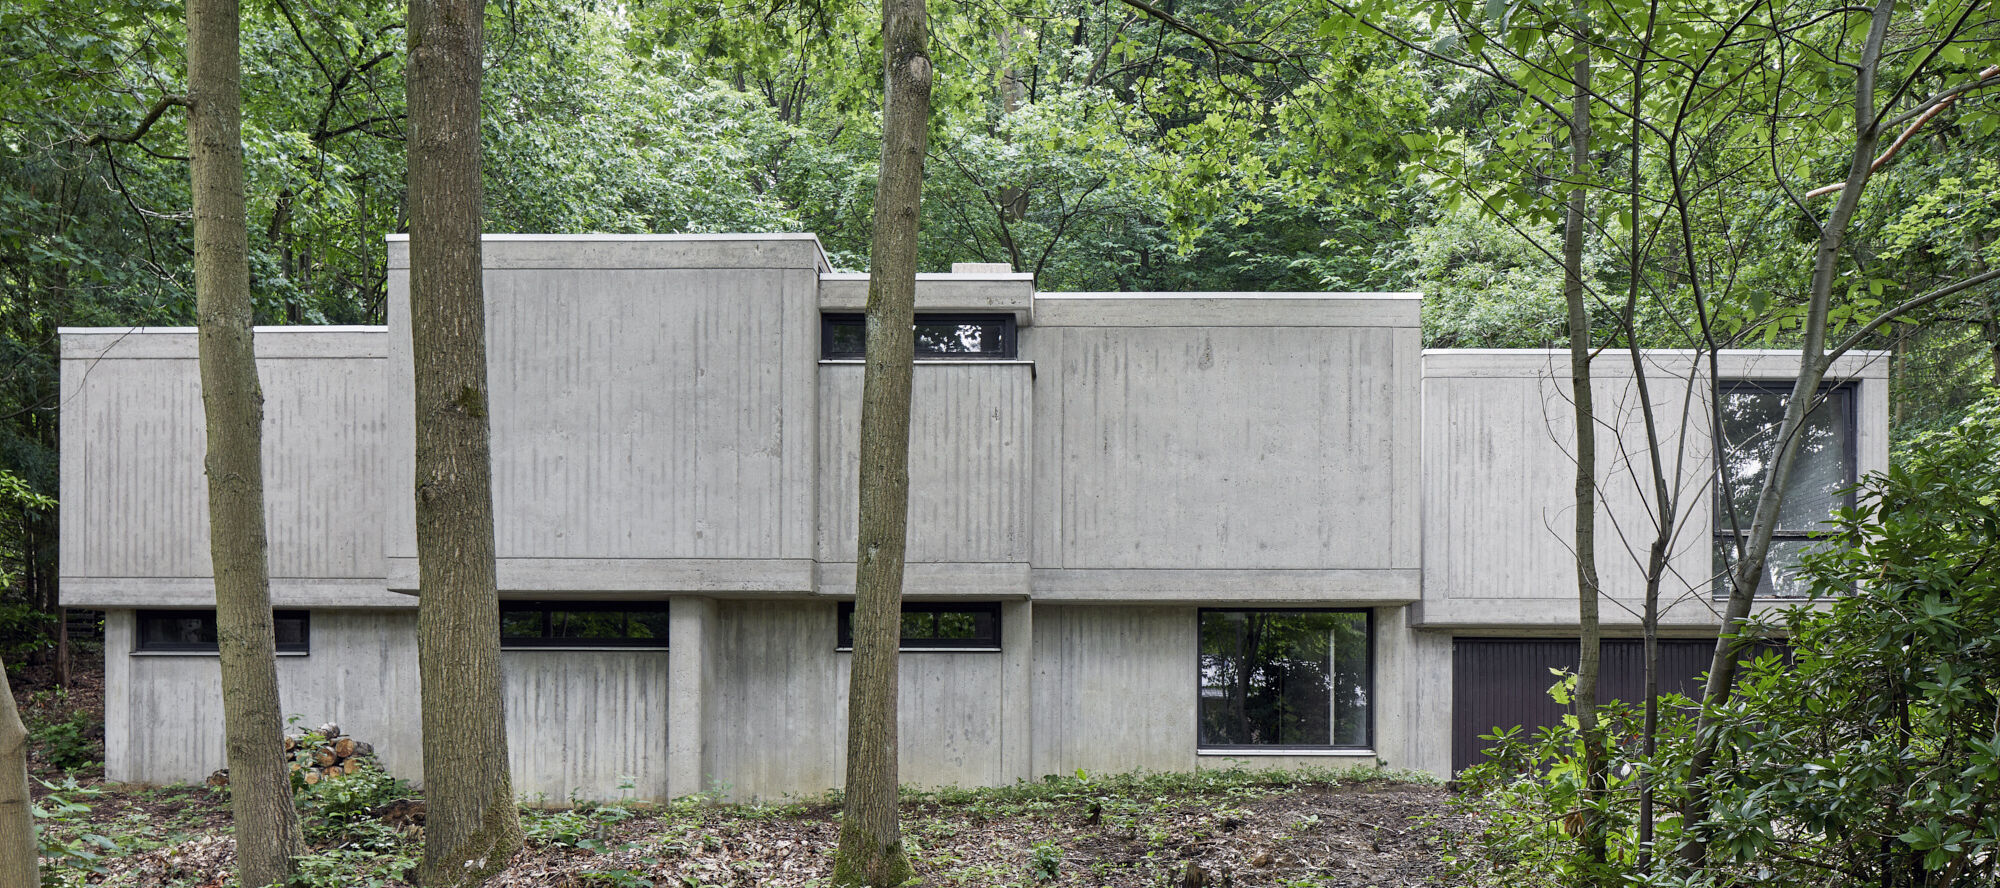 This 1970s brutalist house in Belgium has a new life as a designer’s home and studio